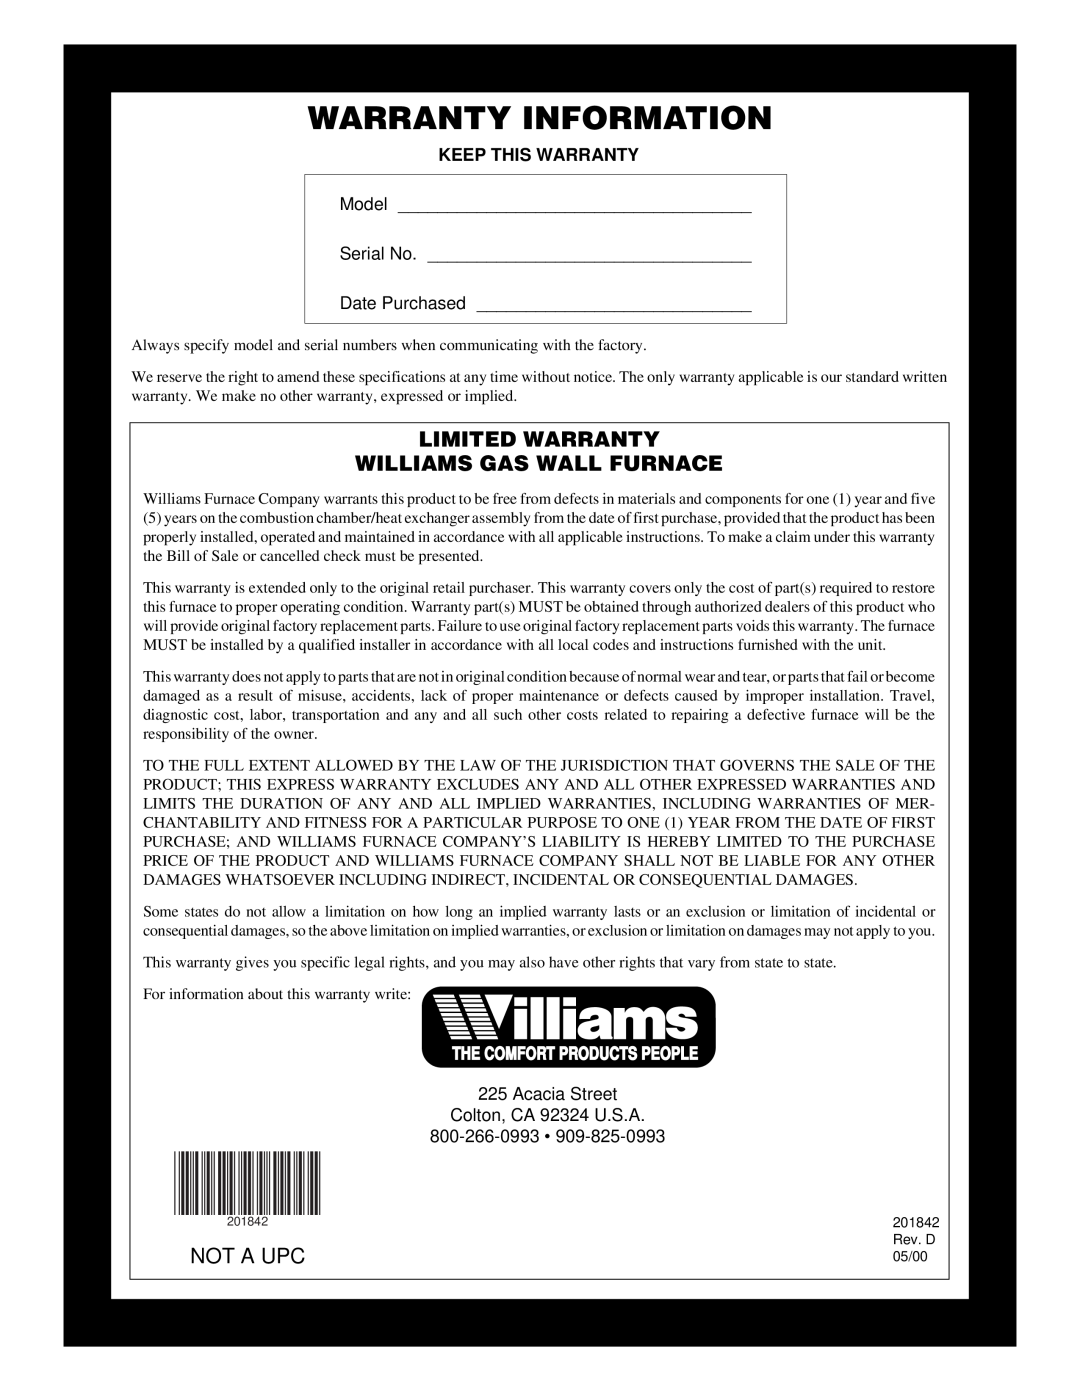 Williams 2503532 Warranty Information, Limited Warranty Williams Gas Wall Furnace, Not A Upc, The Comfort Products People 